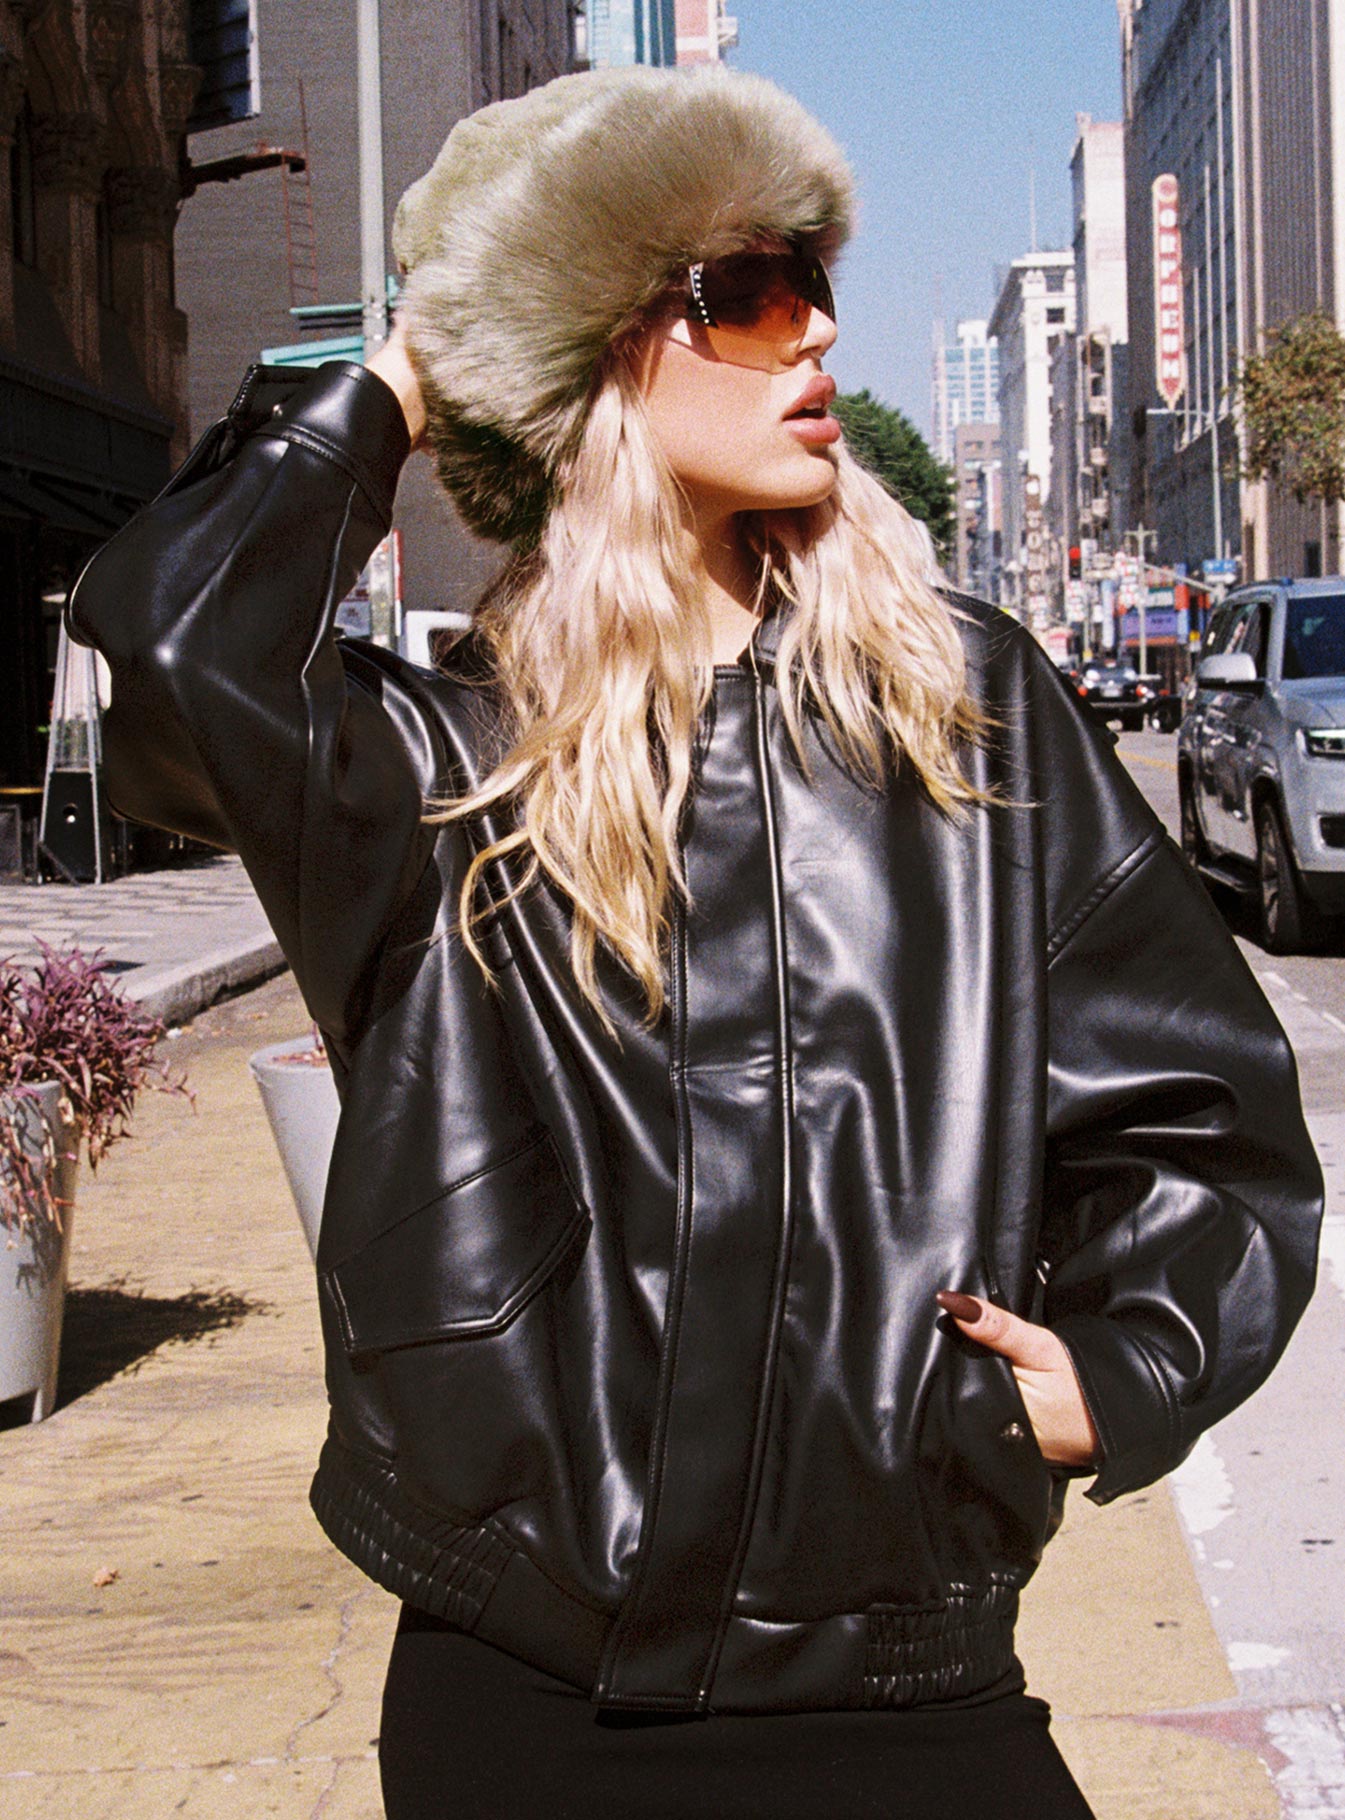 Styling Staples: Bomber Jacket + Leather Jacket - Simply by Simone